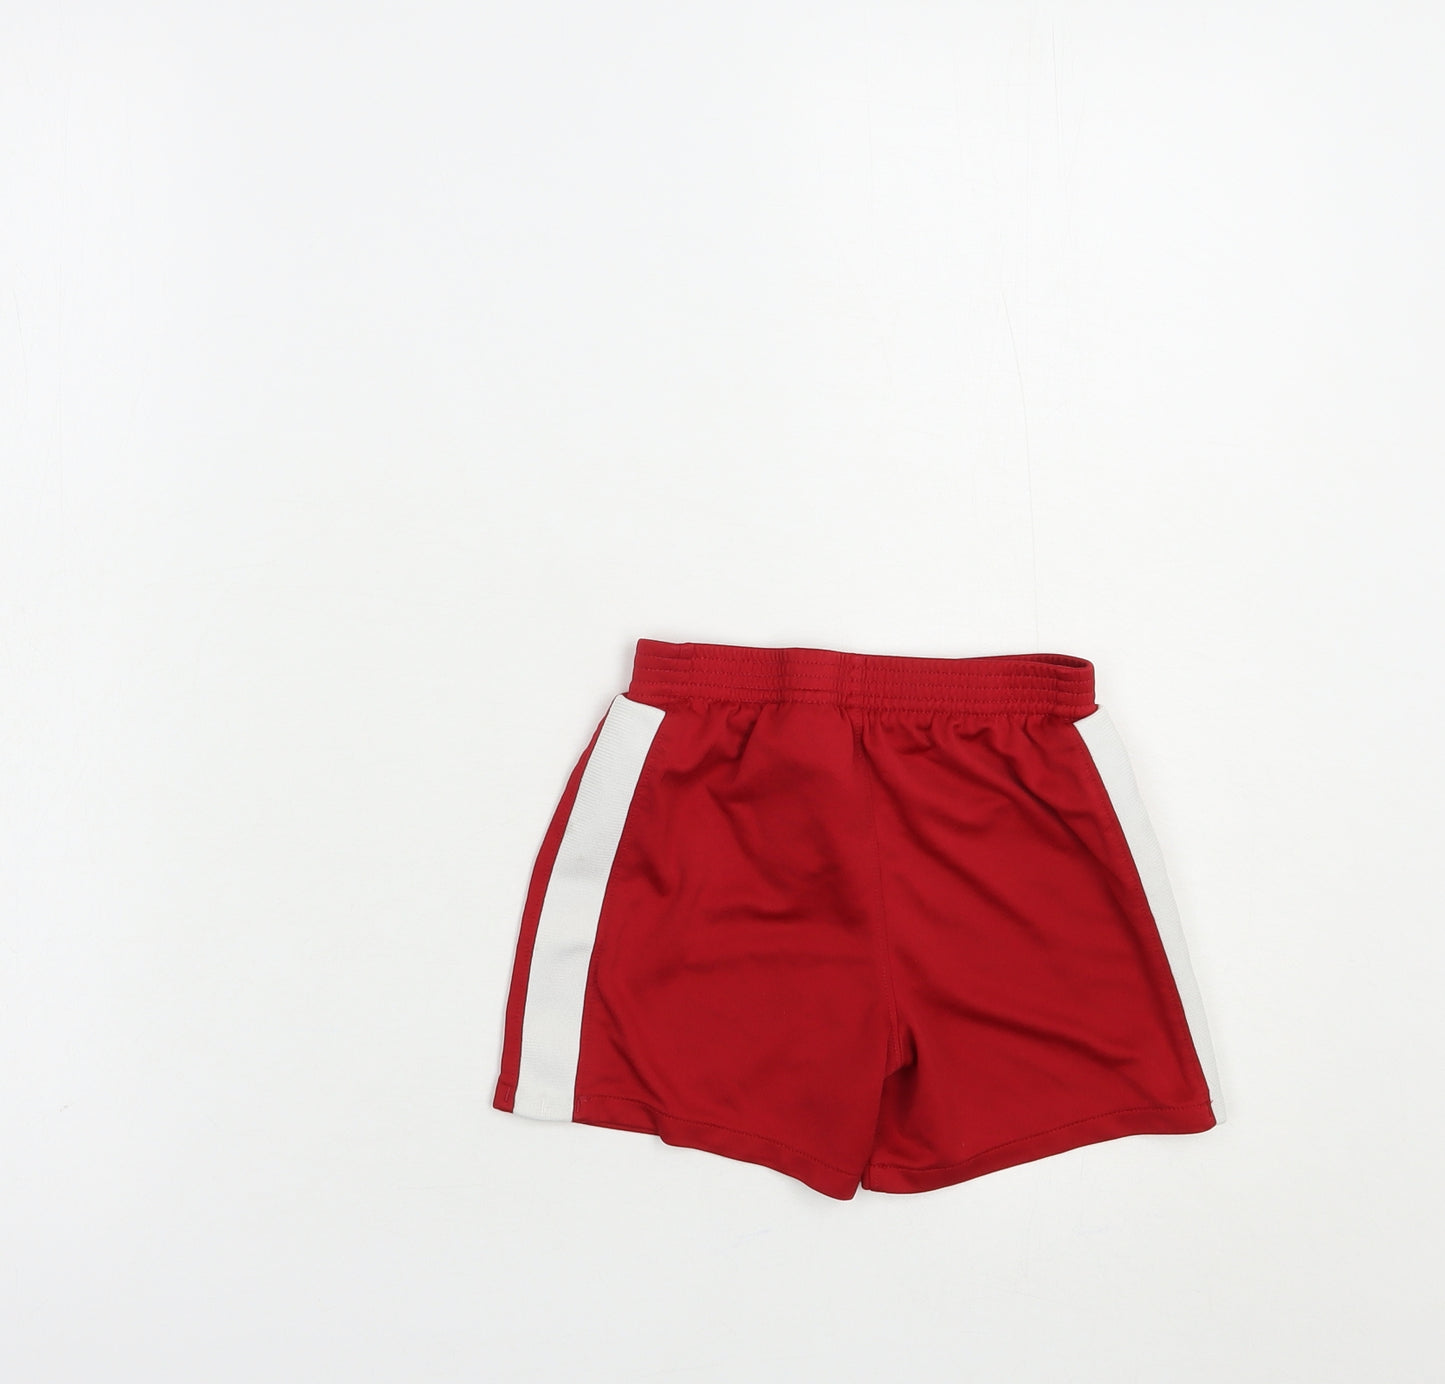 Nike  Boys Red  Polyester Sweat Shorts Size 2-3 Years  Regular  - Liverpool FC